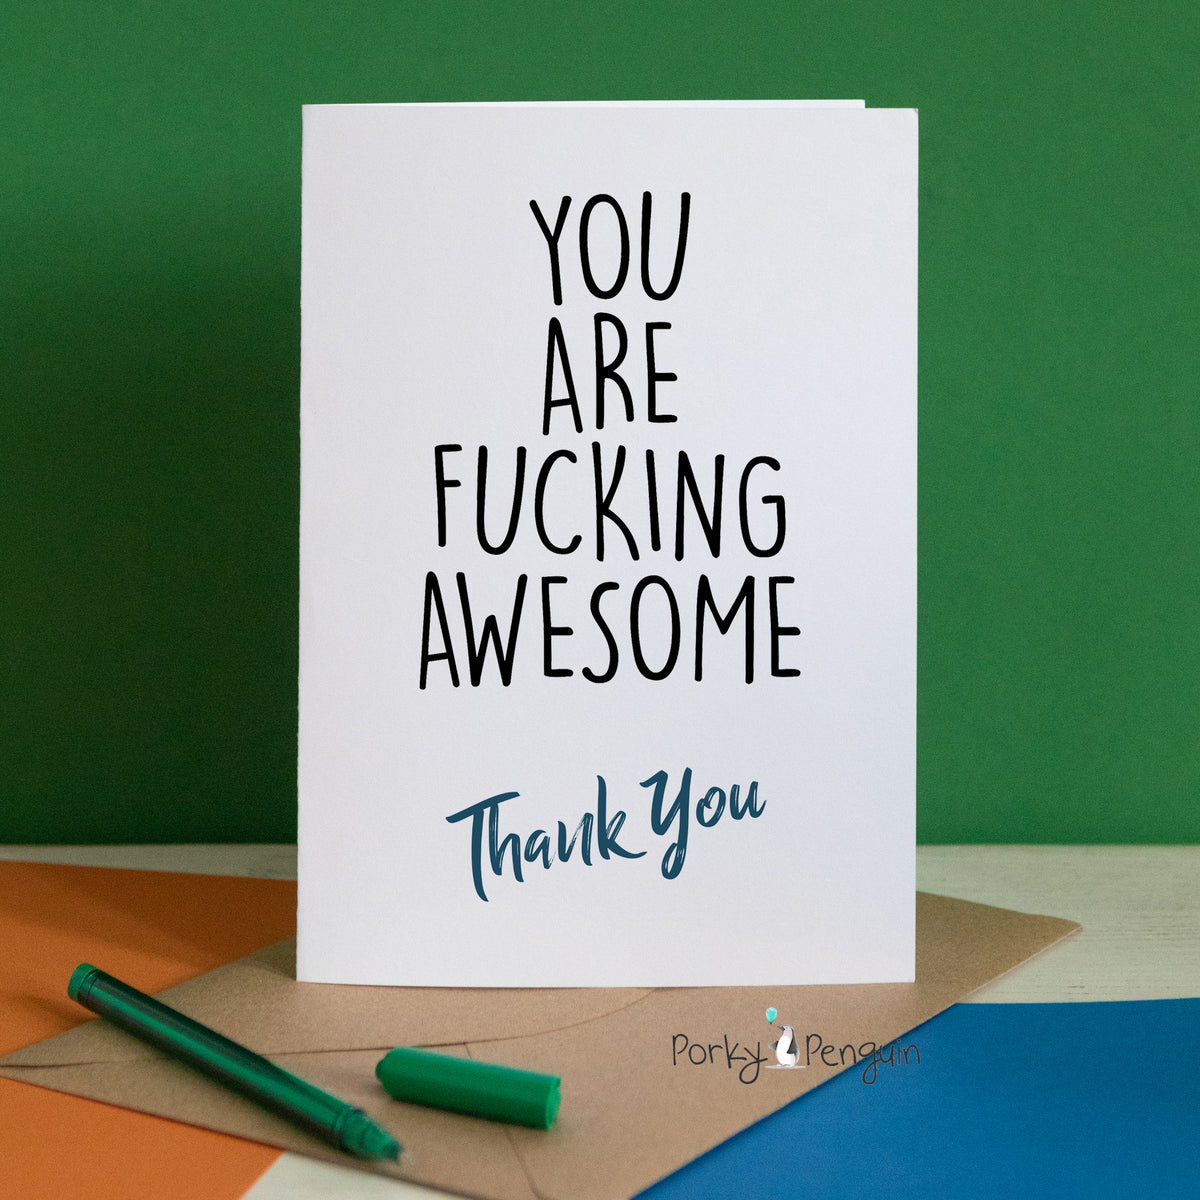 You Are Fucking Awesome Thank You Card Porky Penguin 